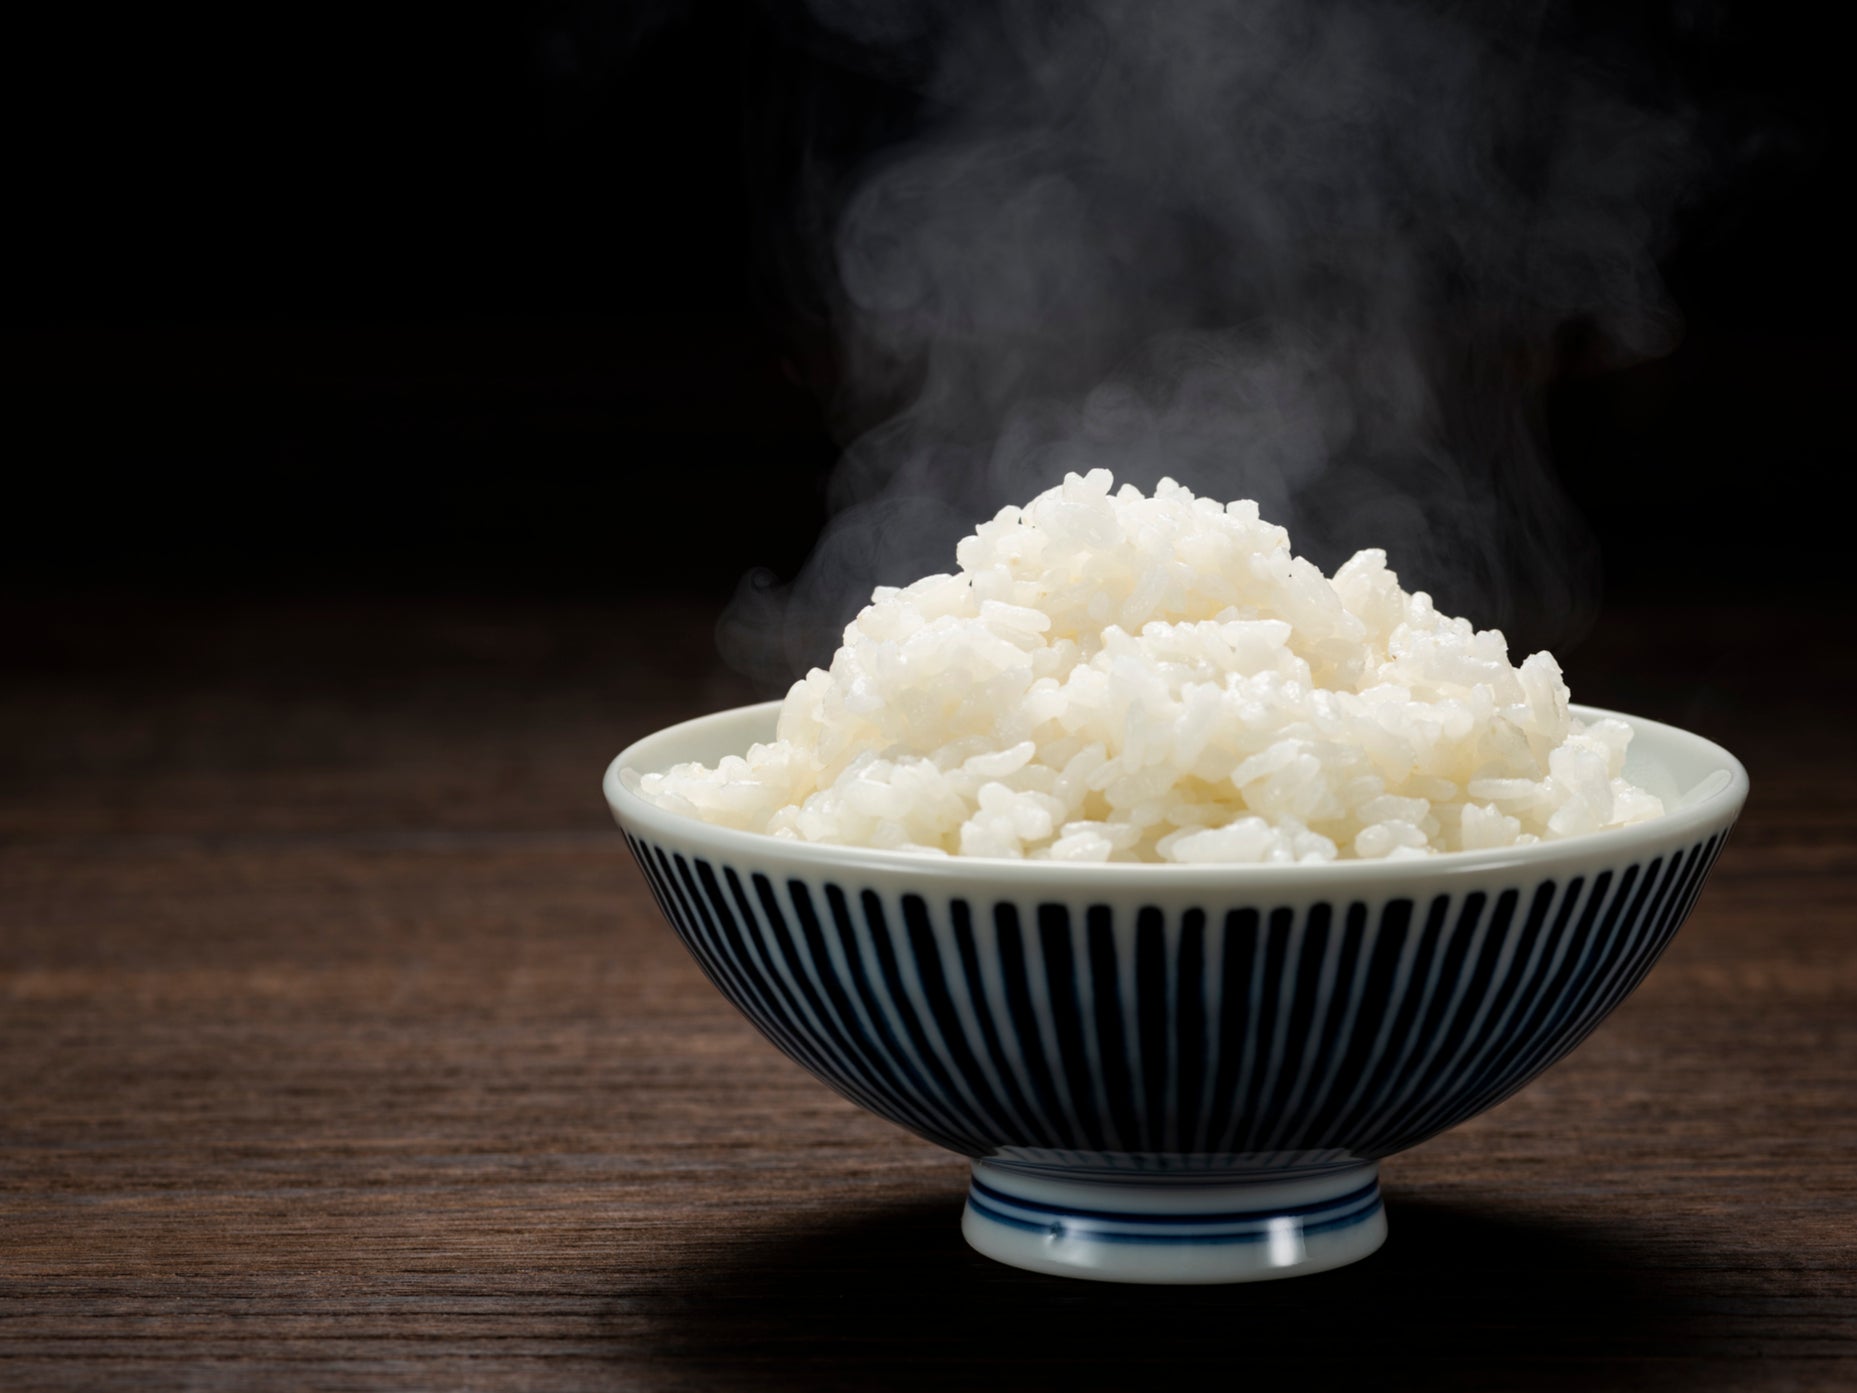 A small bowl of white rice